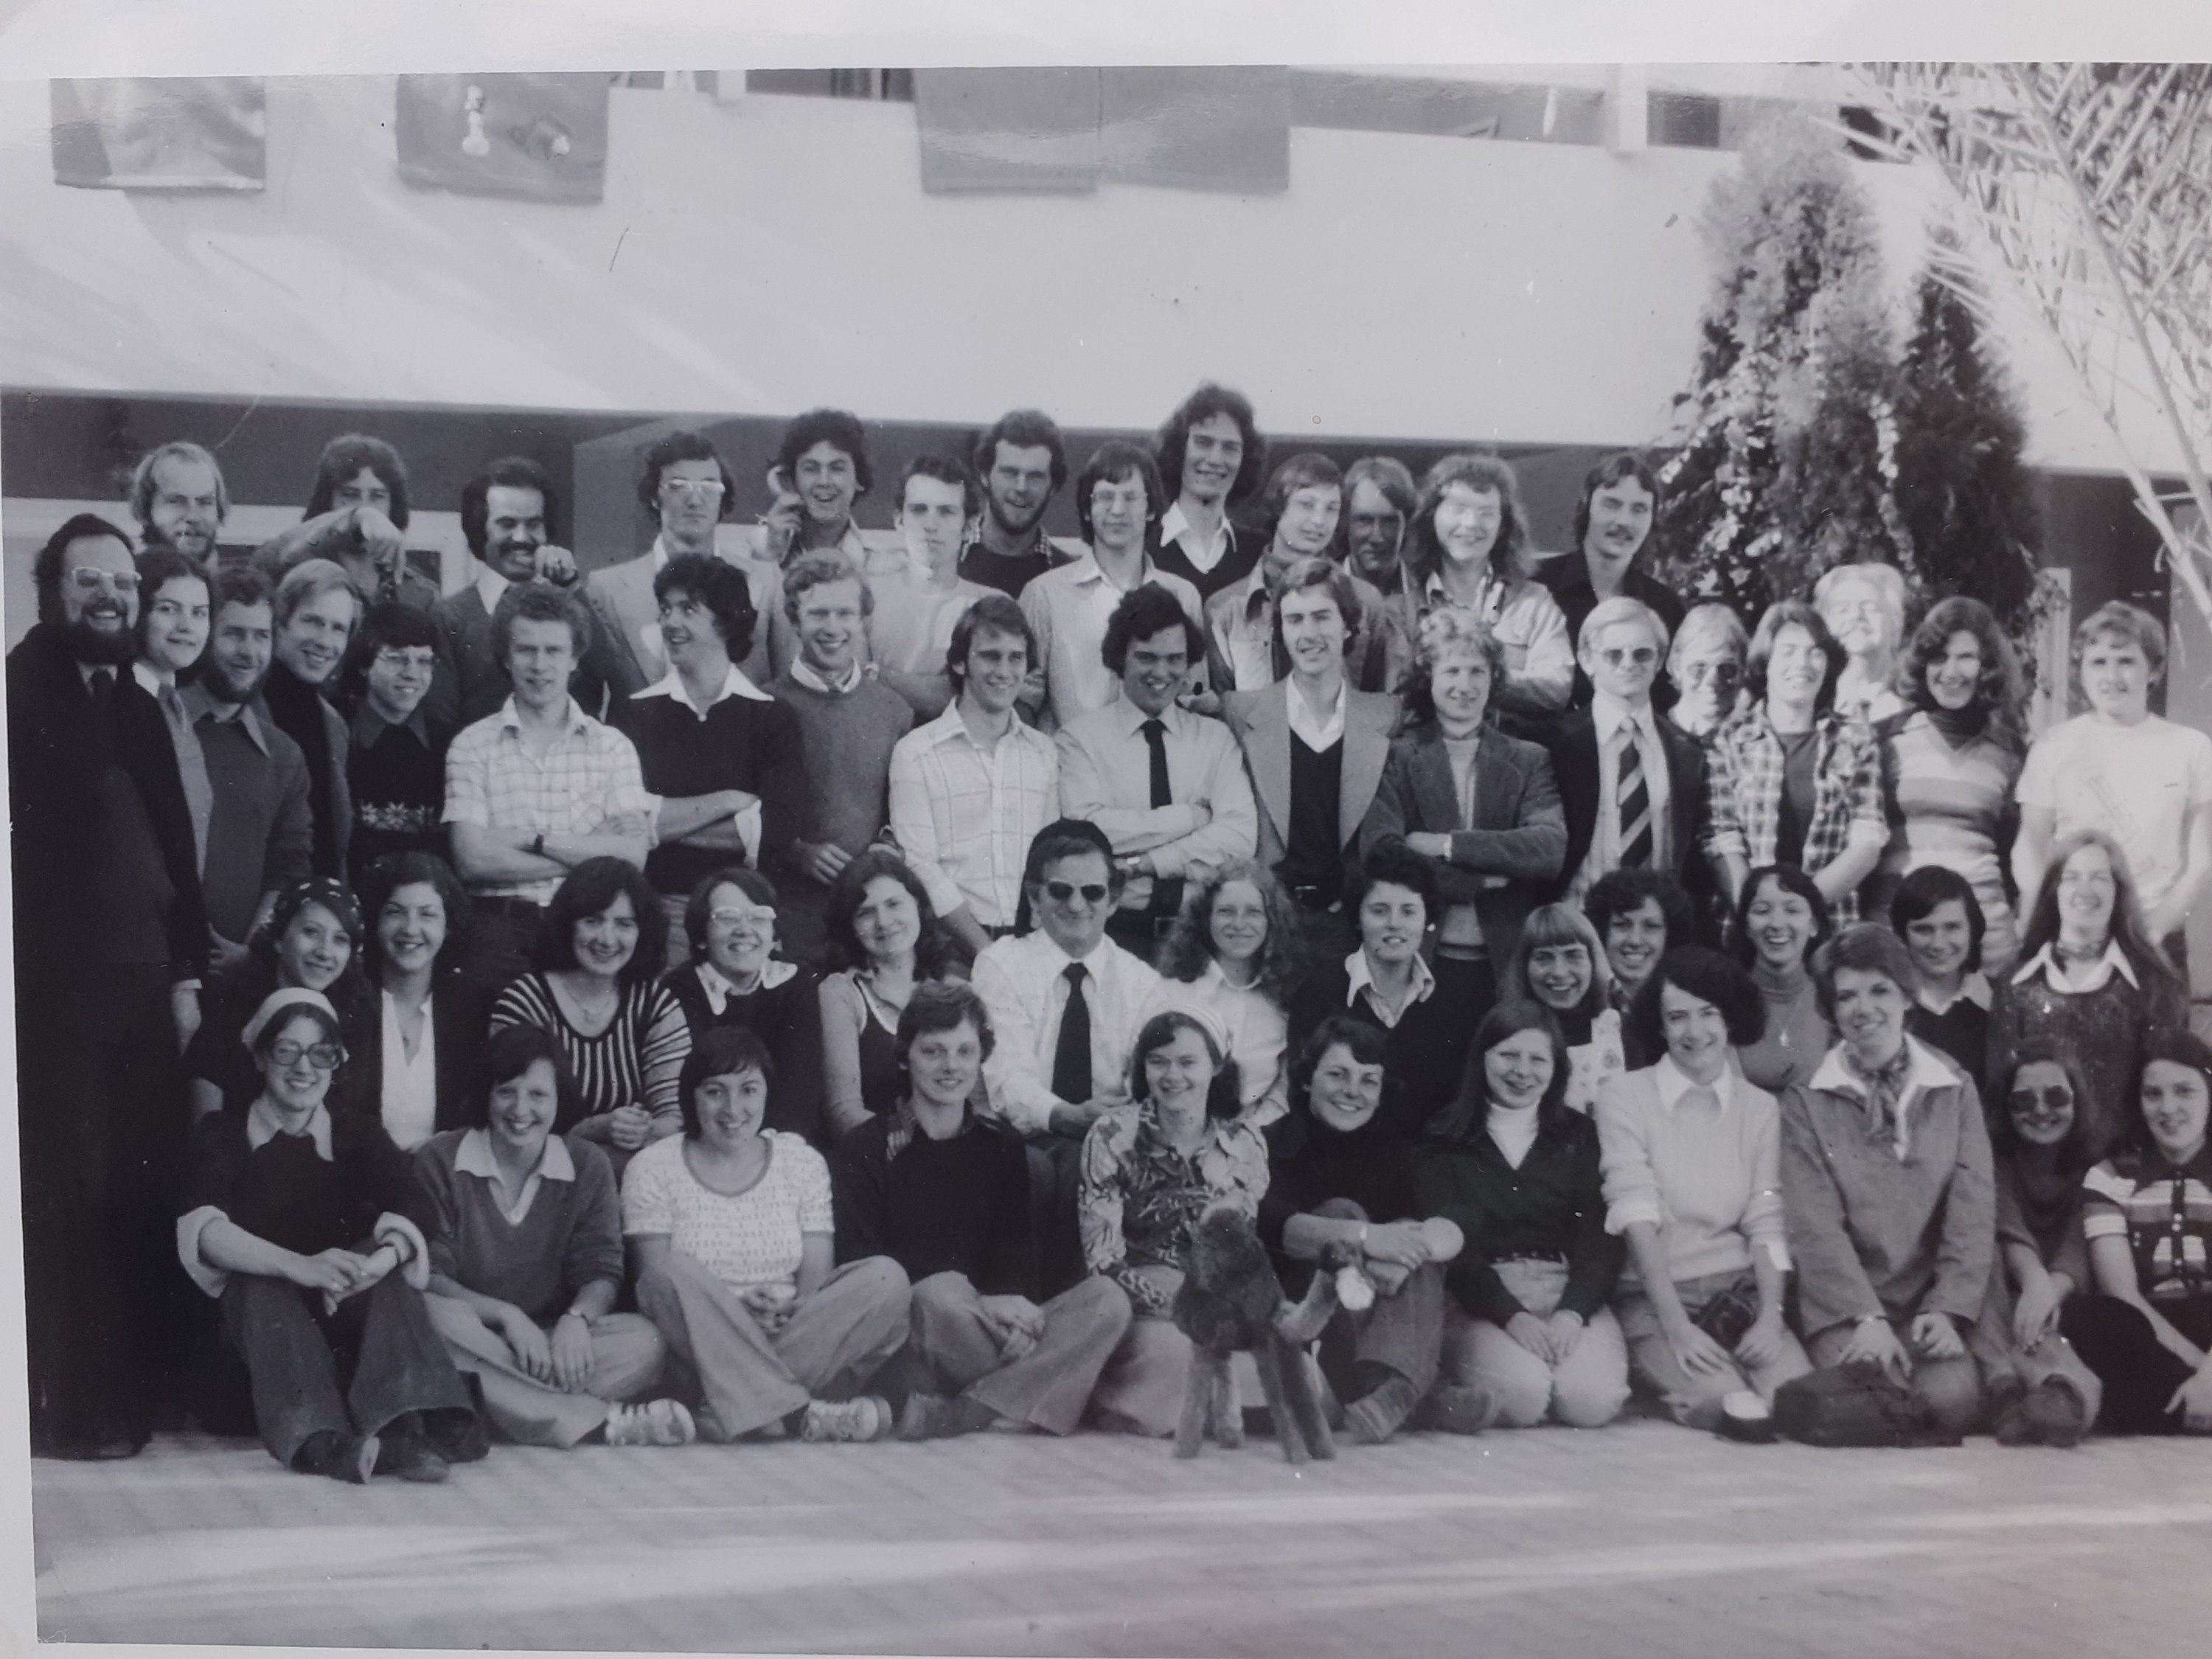 Julie Hope MA 1977 December 1976 we joined the final year undergraduates on a field trip to Sousse, Tunisia and the second, black and white photo attached is the group photo, taken at the hotel we were staying in